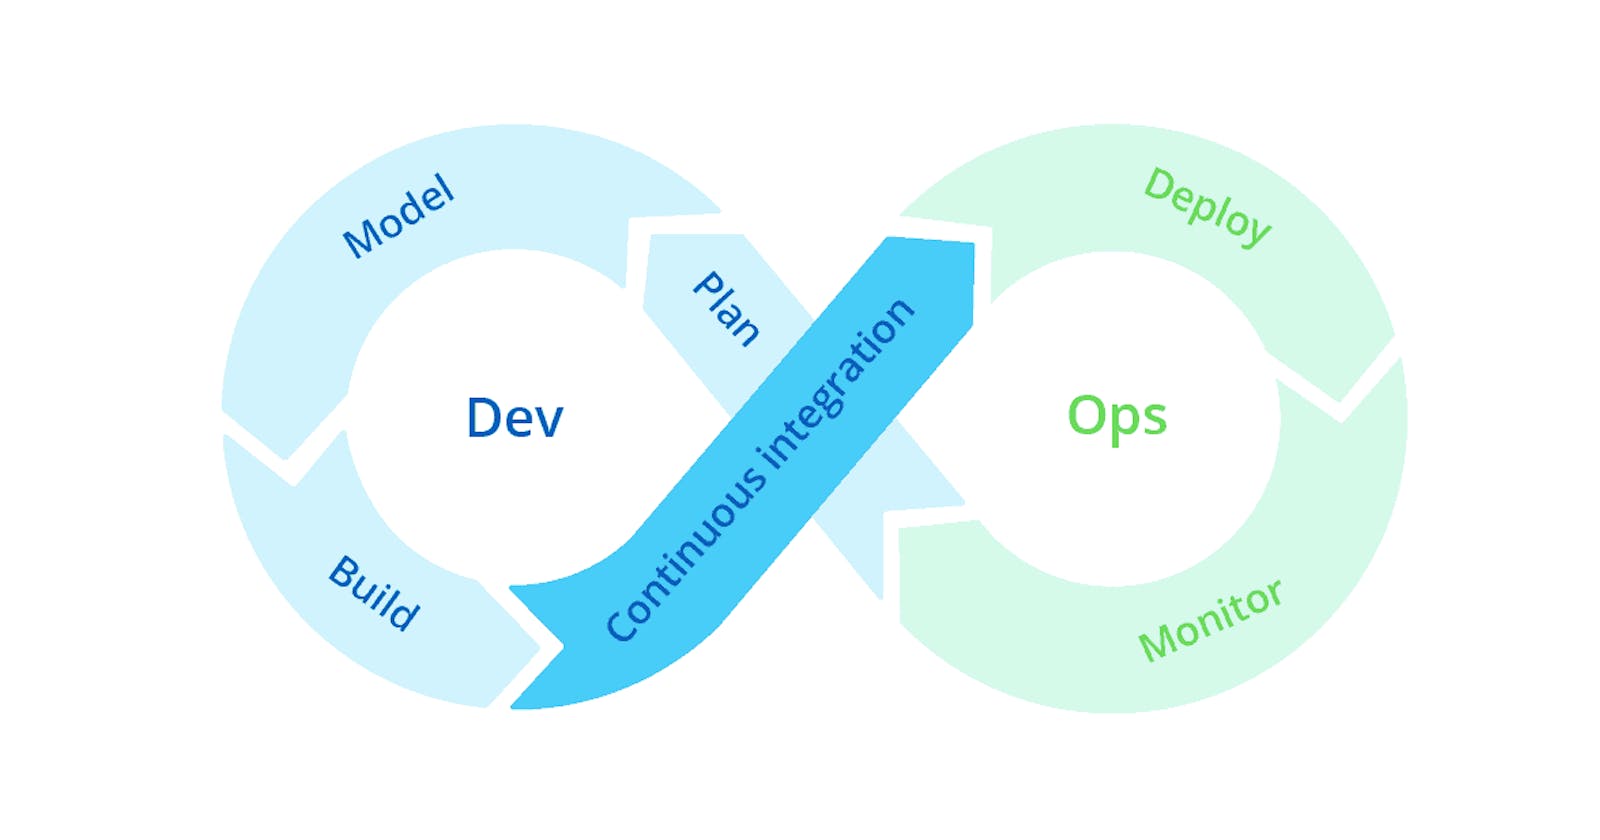 Day 1: Introduction to DevOps